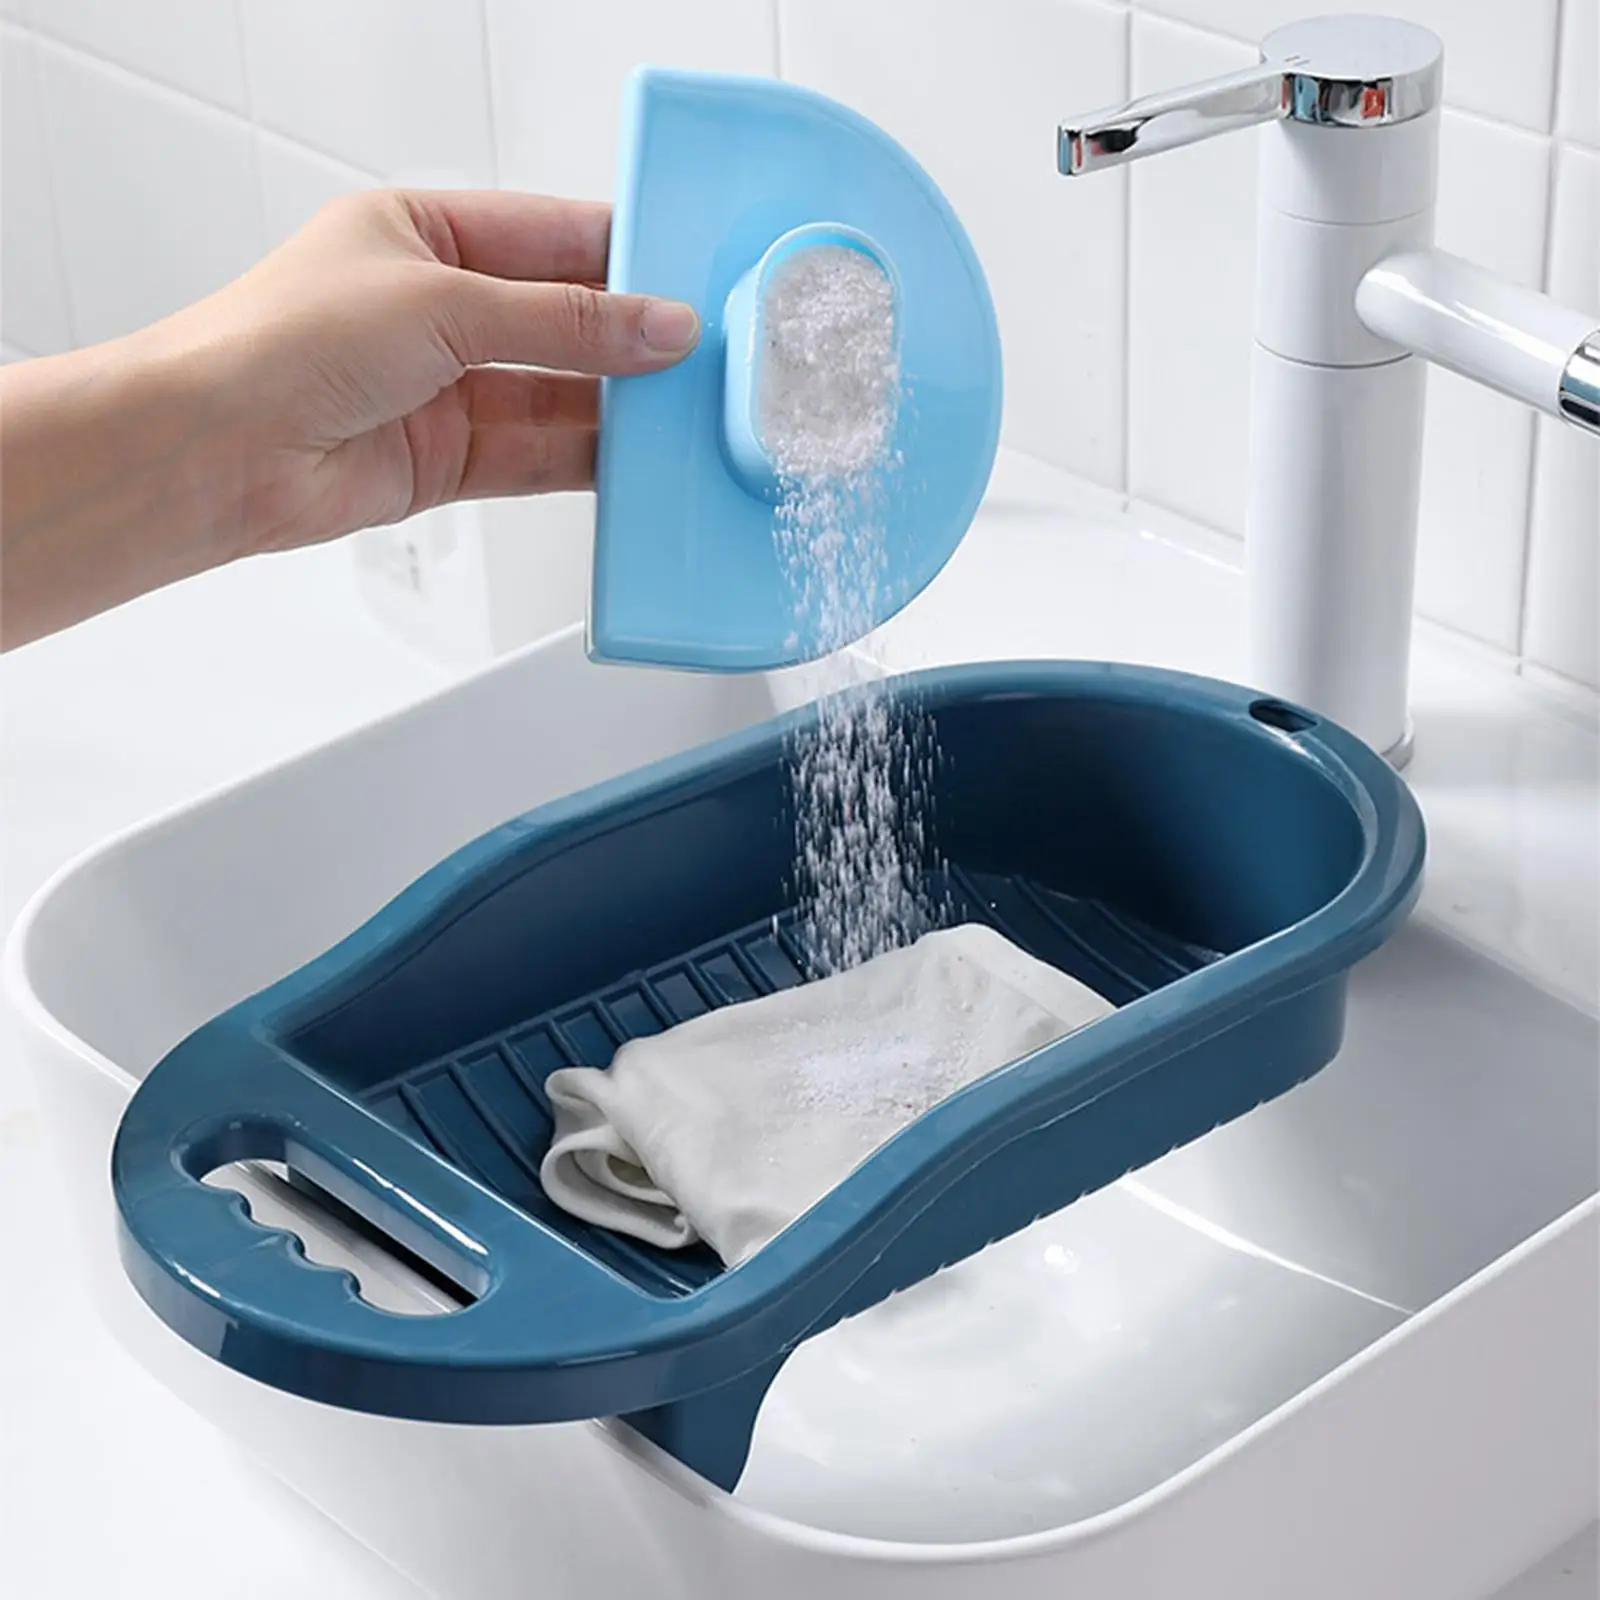 Washing Board Hand Wash Clothes Washboard with Soap Holder for Household